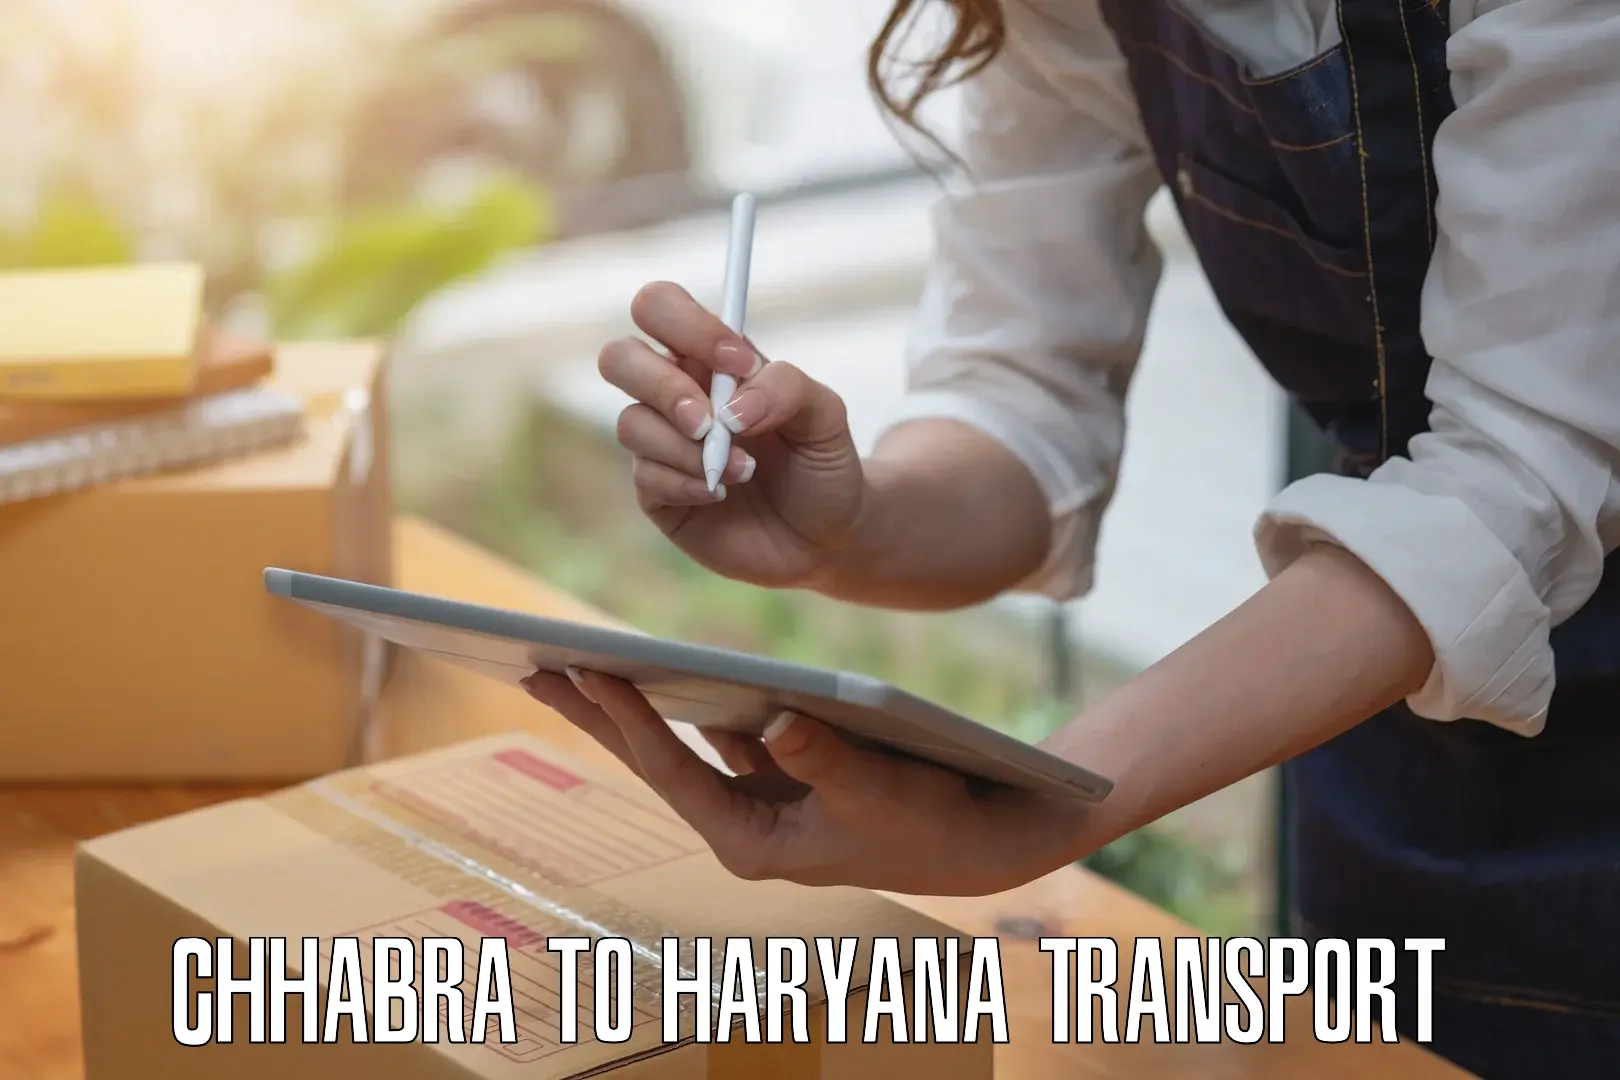 Cargo transportation services Chhabra to Pinjore